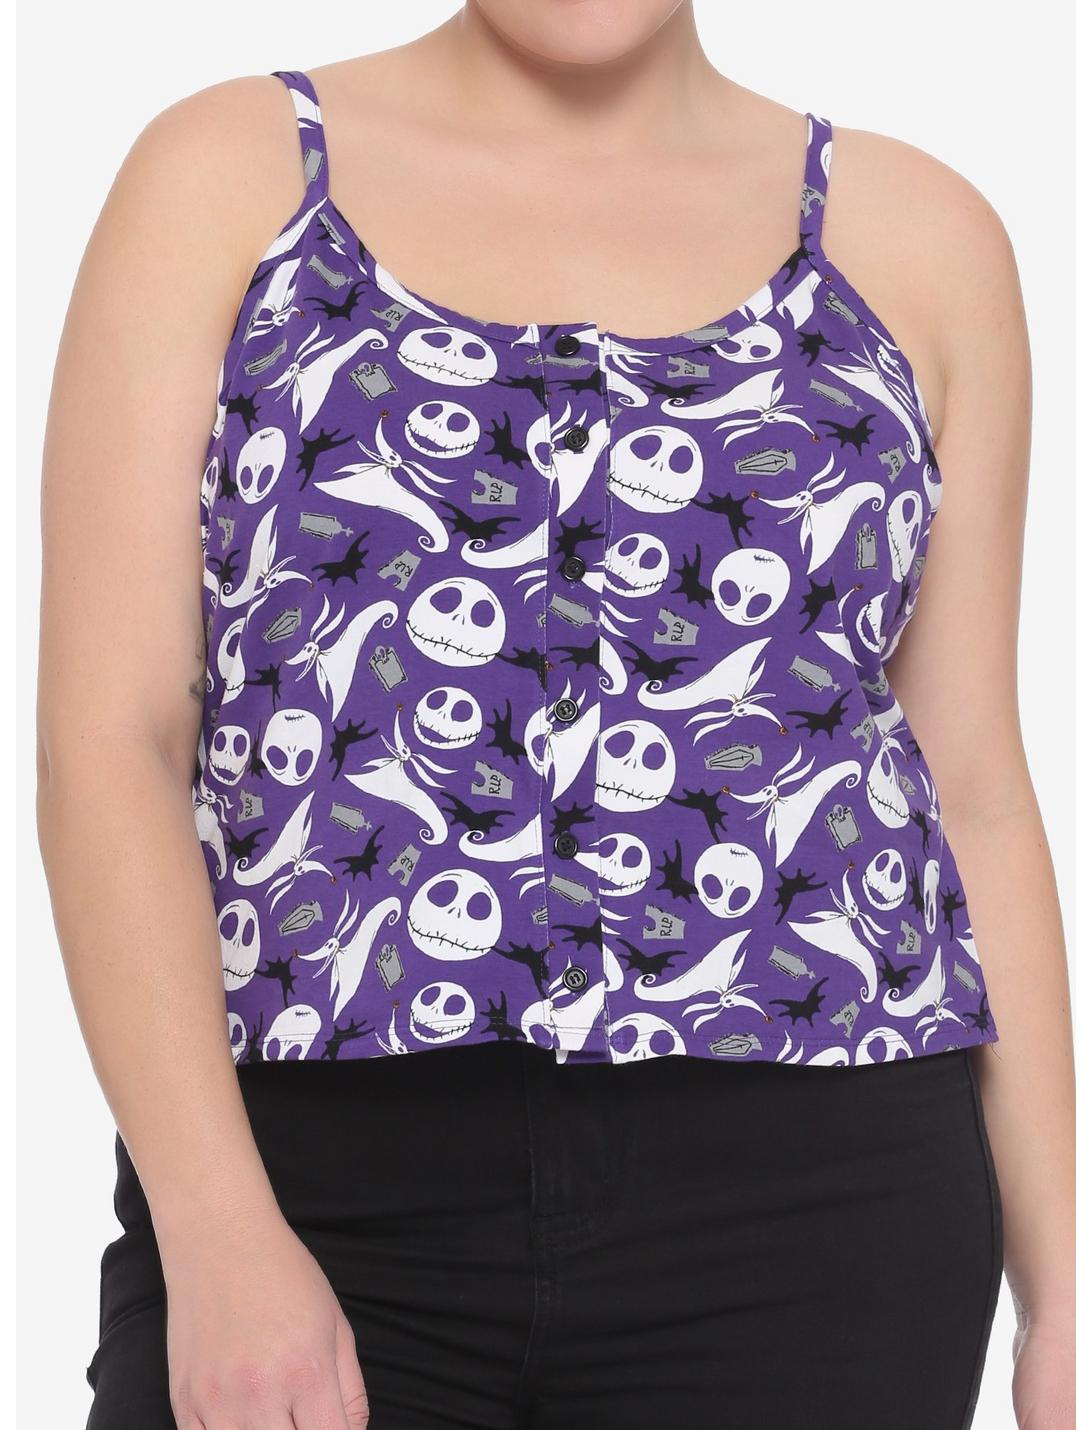 The Nightmare Before Christmas Icon Button-Front Girls Strappy Tank Top Plus Size, MULTI, hi-res